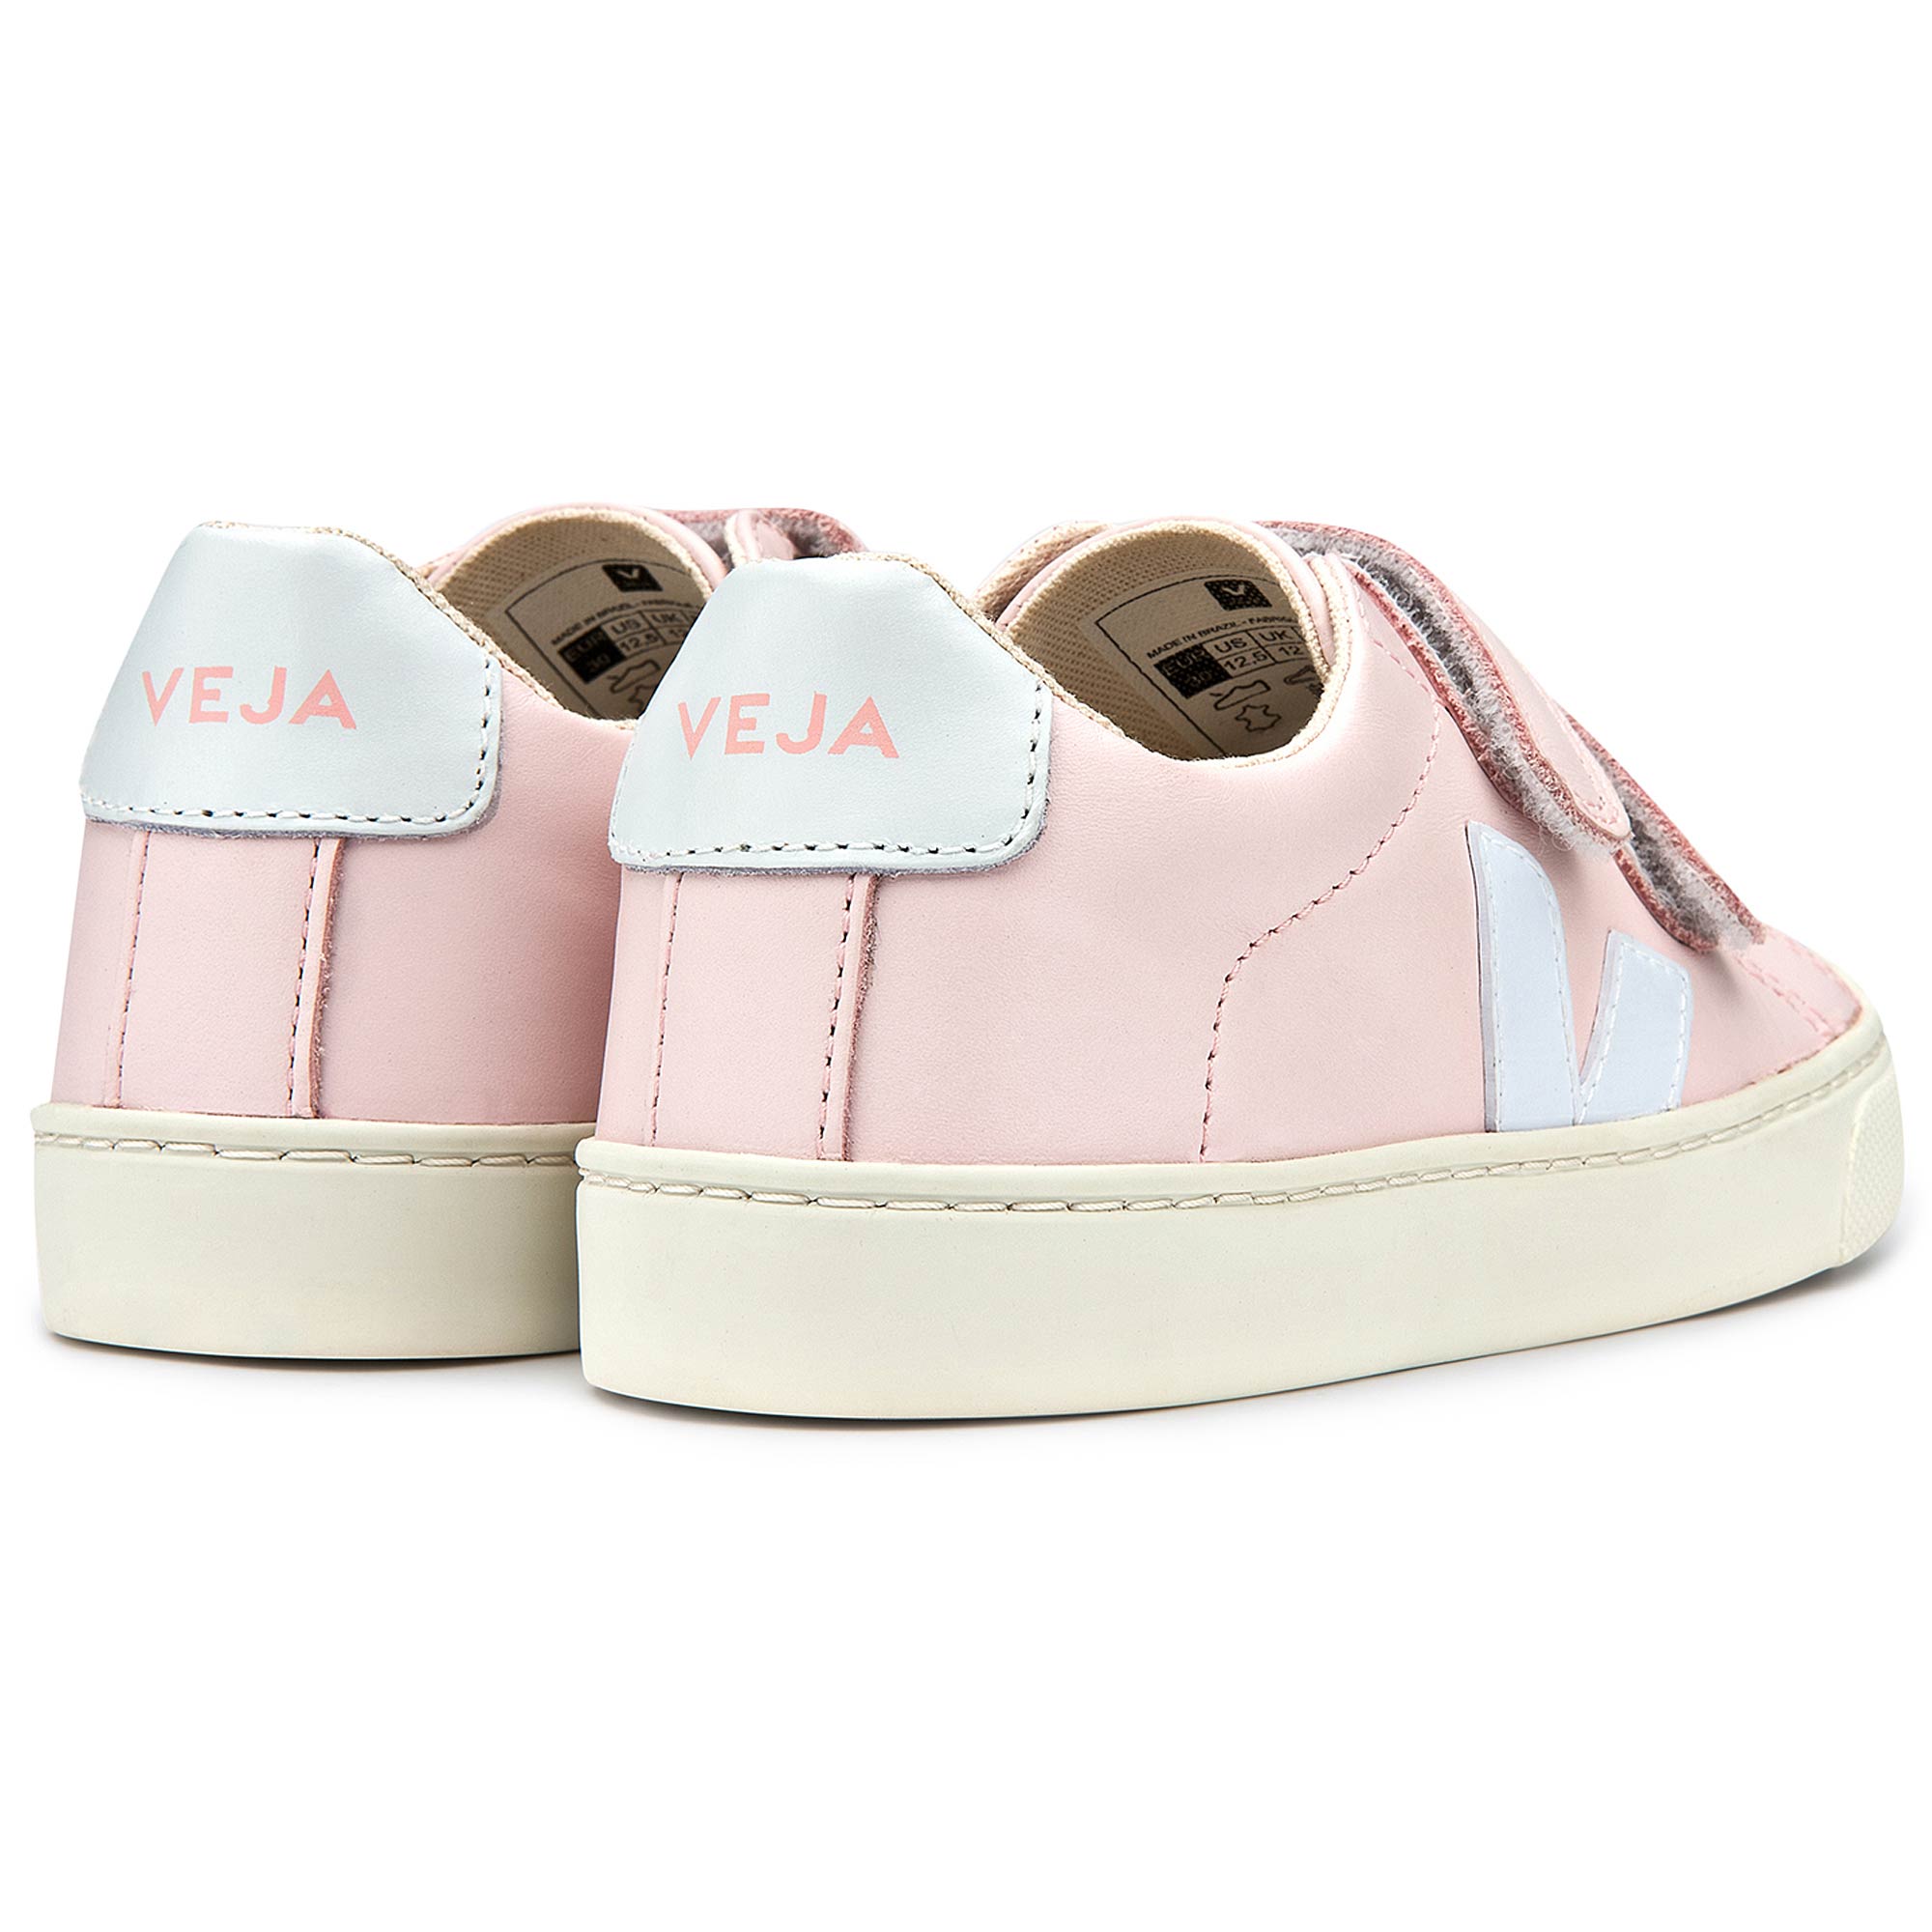 Baby  Girls  Pink   Leather Velcro   With  White  "V" Shoes